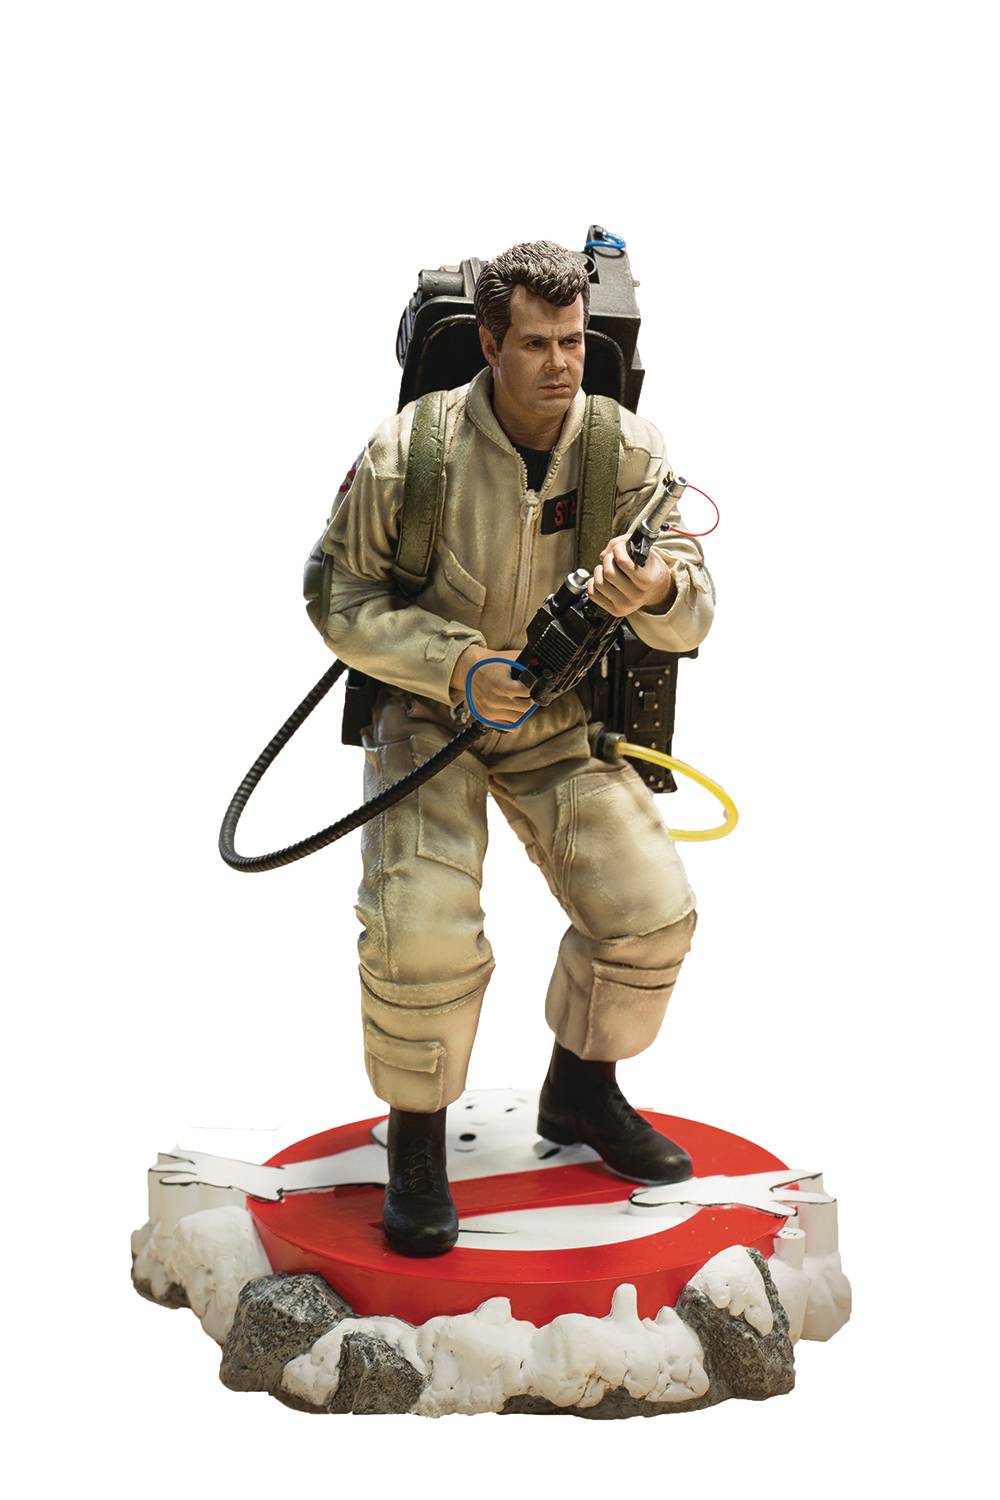 Ray Stantz and Egon Spangler Set Ghostbusters 1/8 Scale Statue Pre-order